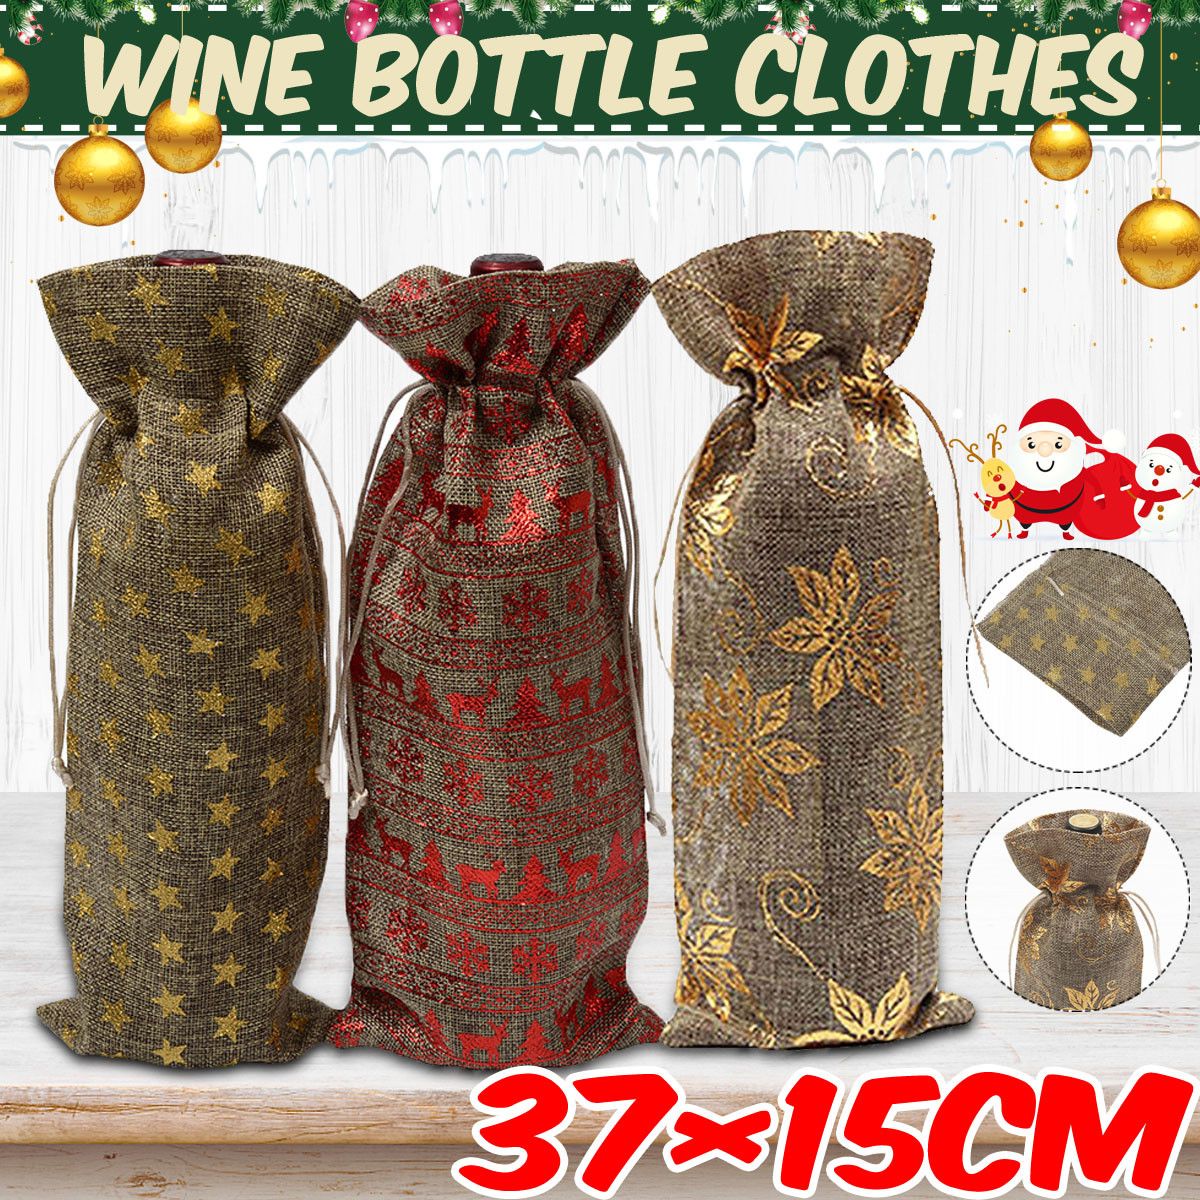 Christmas-Sweater-Winee-Bottle-Clothes-Linenmaterial-Soft-Light-Weight-ReusableRed-Winee-Set-Tools-1720496